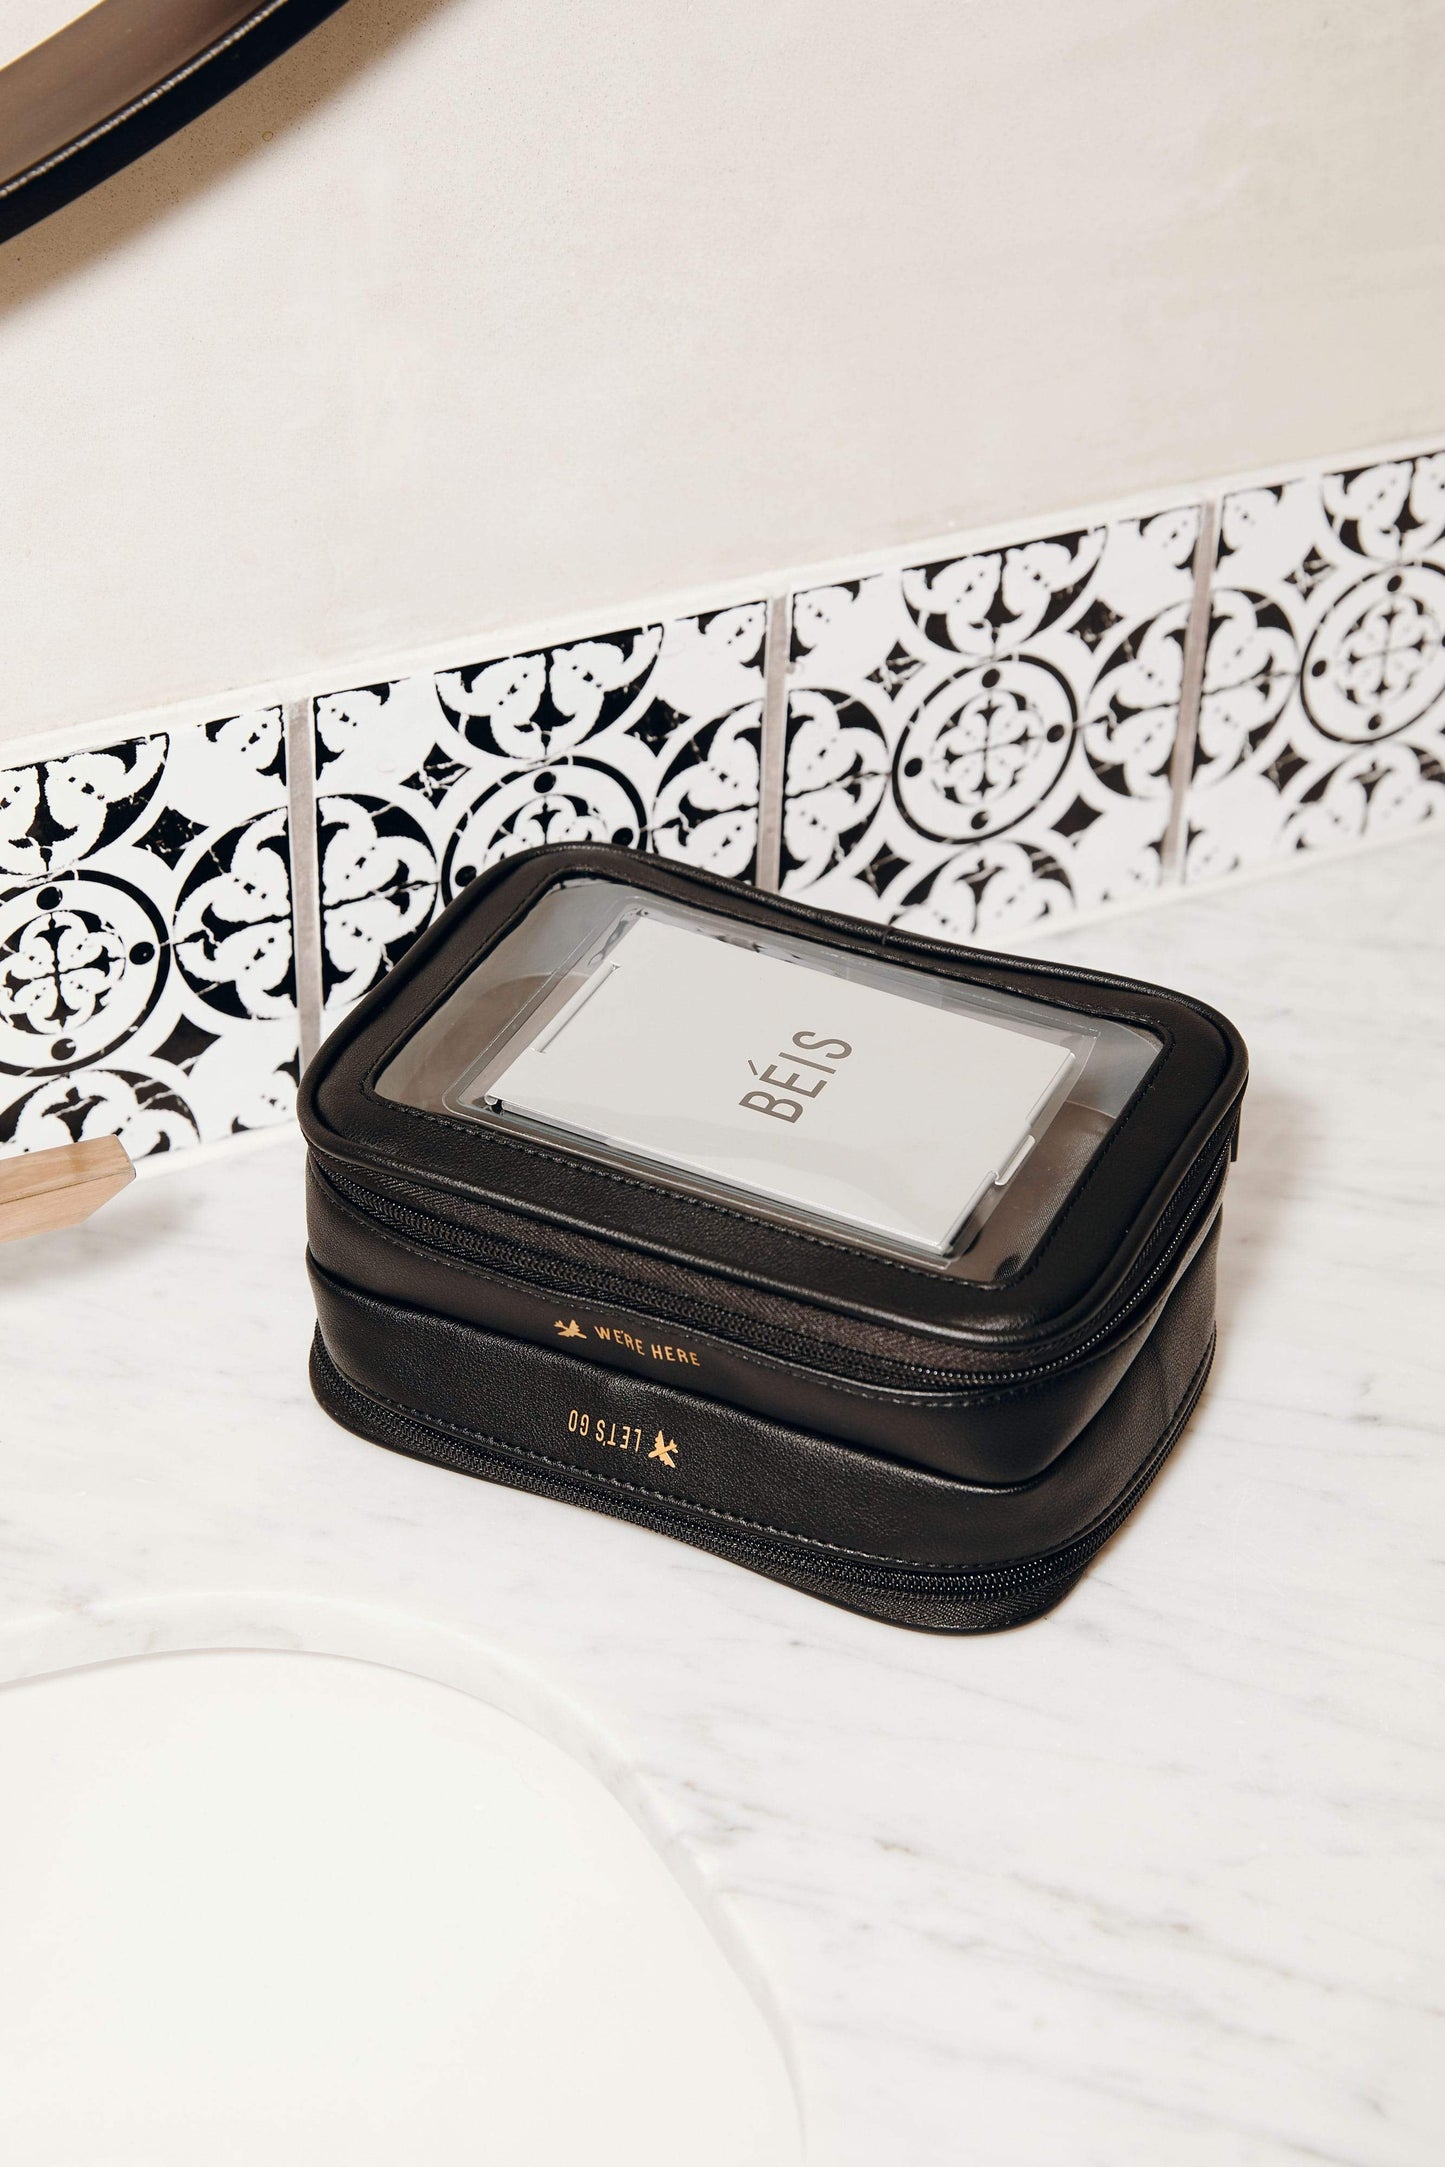 BEIS by Shay Mitchell | The On-The-Go Essential case in Black on marble countertop